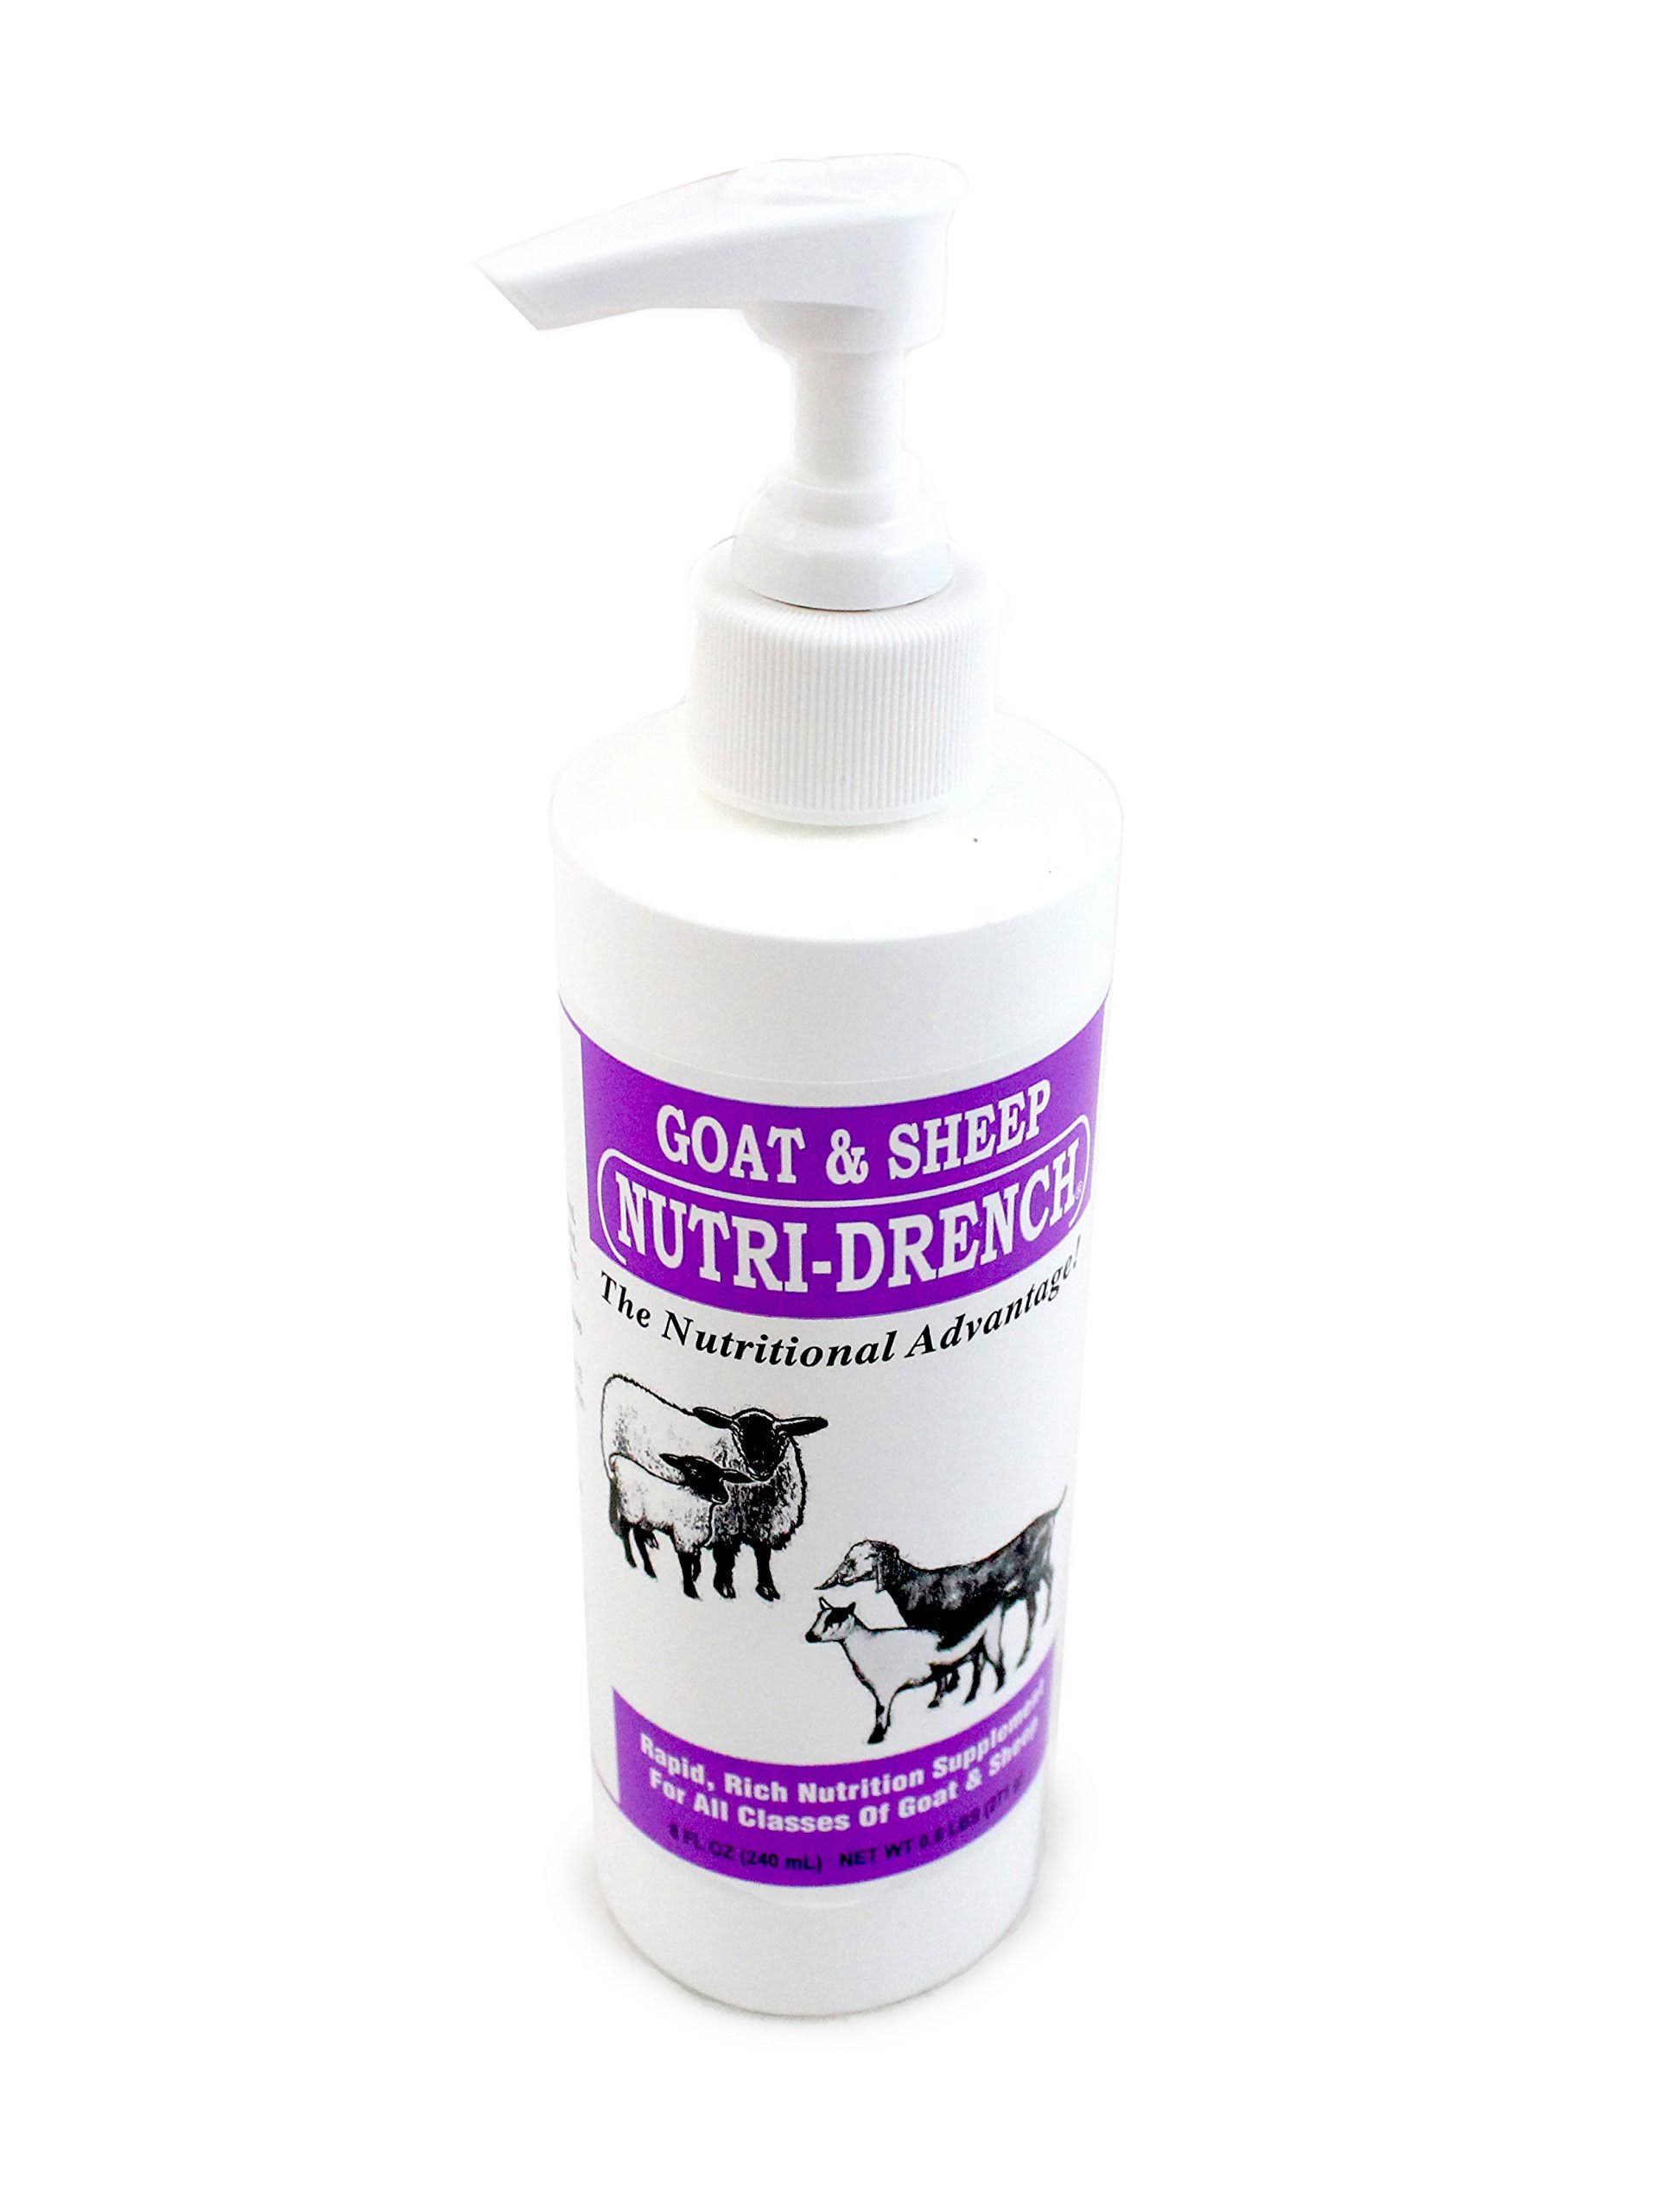 Nutri Drench Rapid Rich Nutrition Supplement for All Goats - 8oz